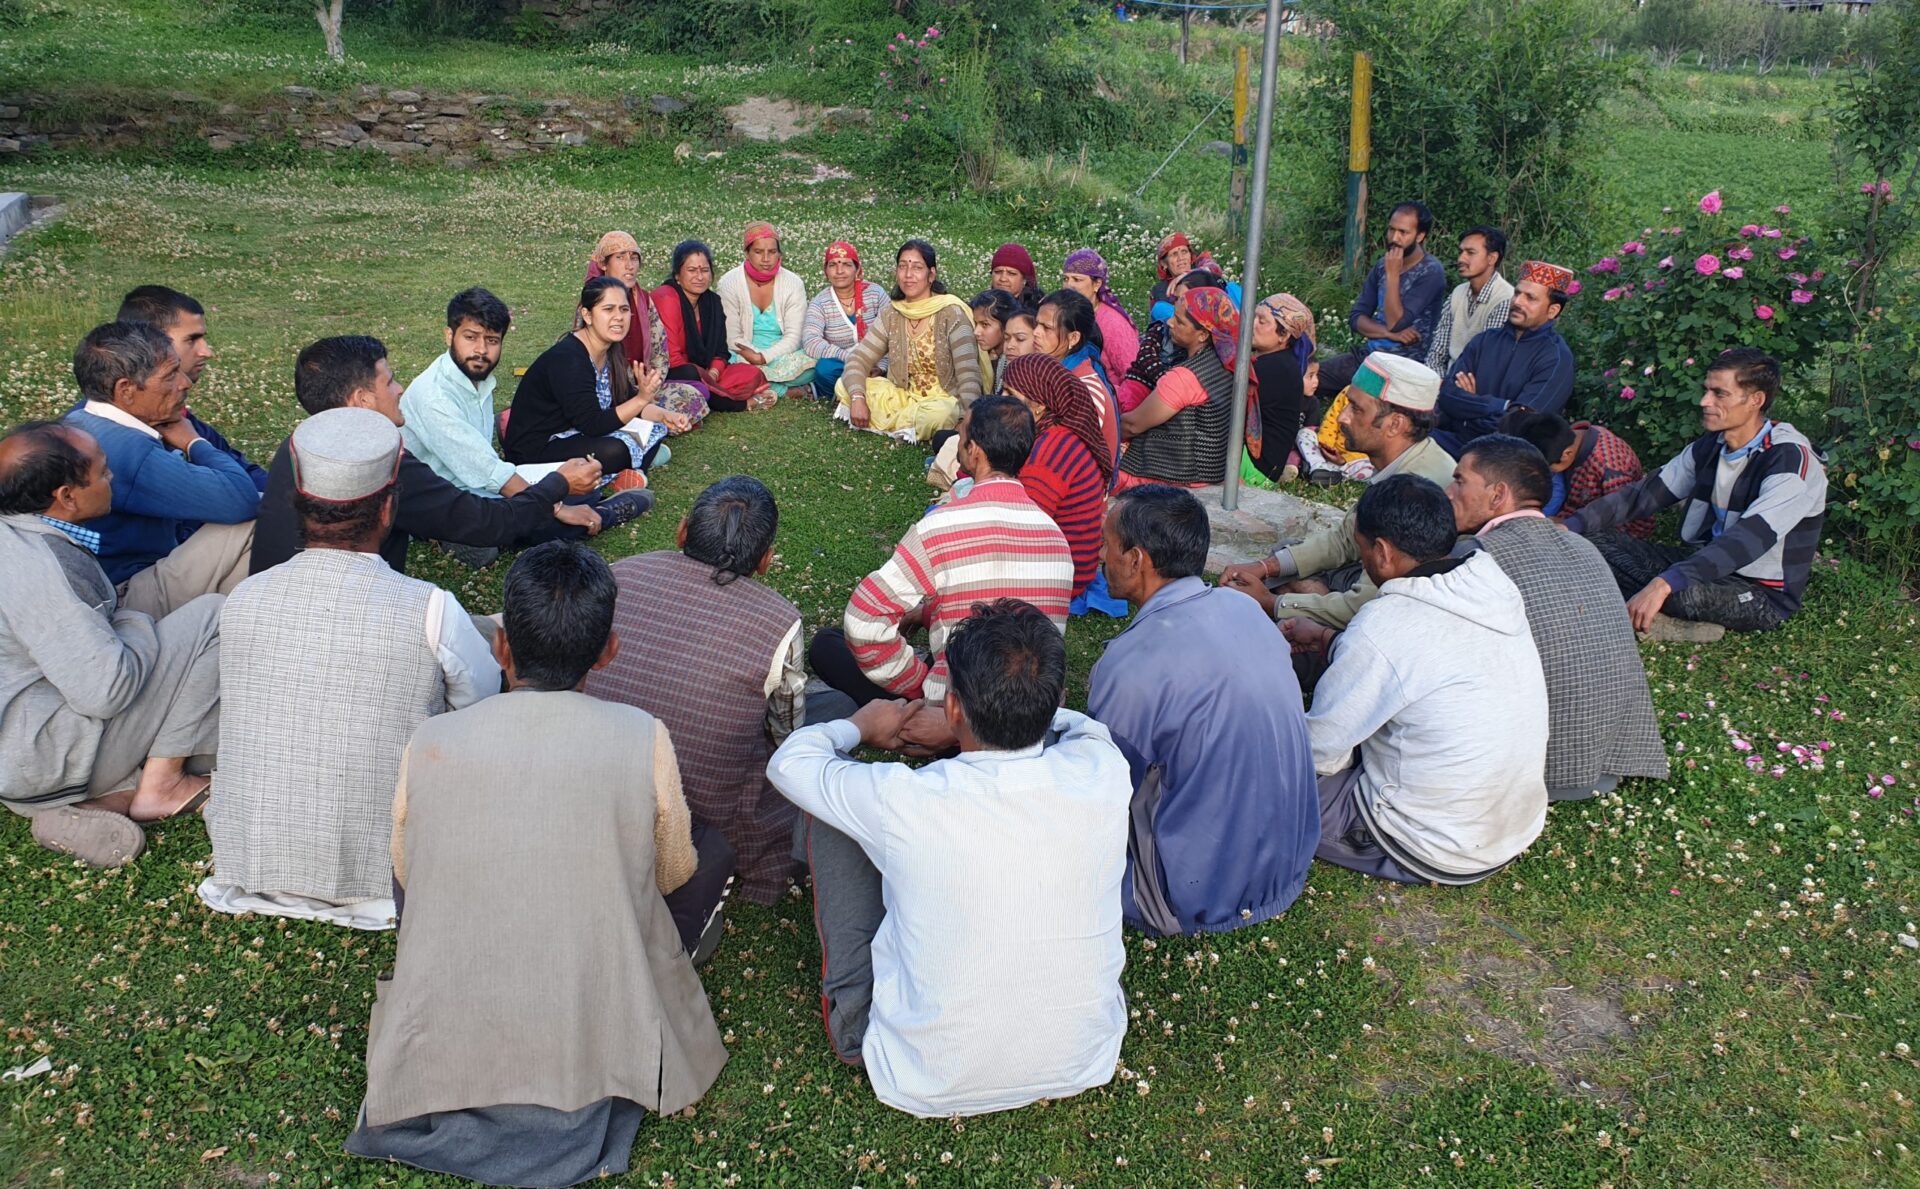 People gathered and discussed, sitting on green grass